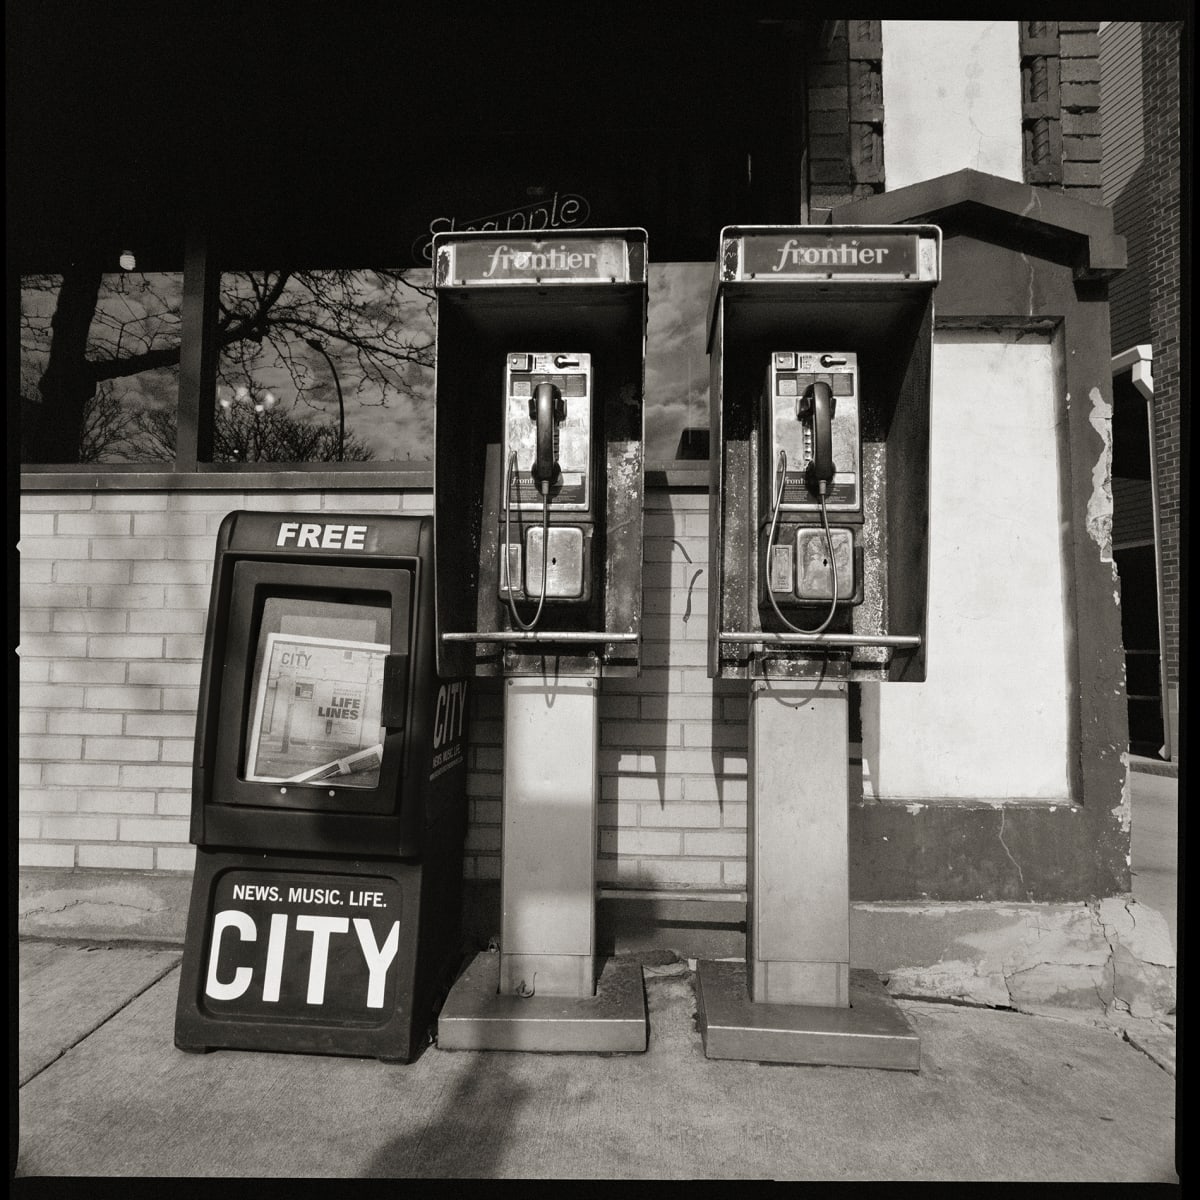 585.232.9542 & 585.232.9262 – Busy Bee Restaurant, 124 West Main Street, Rochester, NY 14614 by Eric T. Kunsman  Image: ID: A black and white image shows two pay phones to the right of a City Newspaper container. This is on a sidewalk.